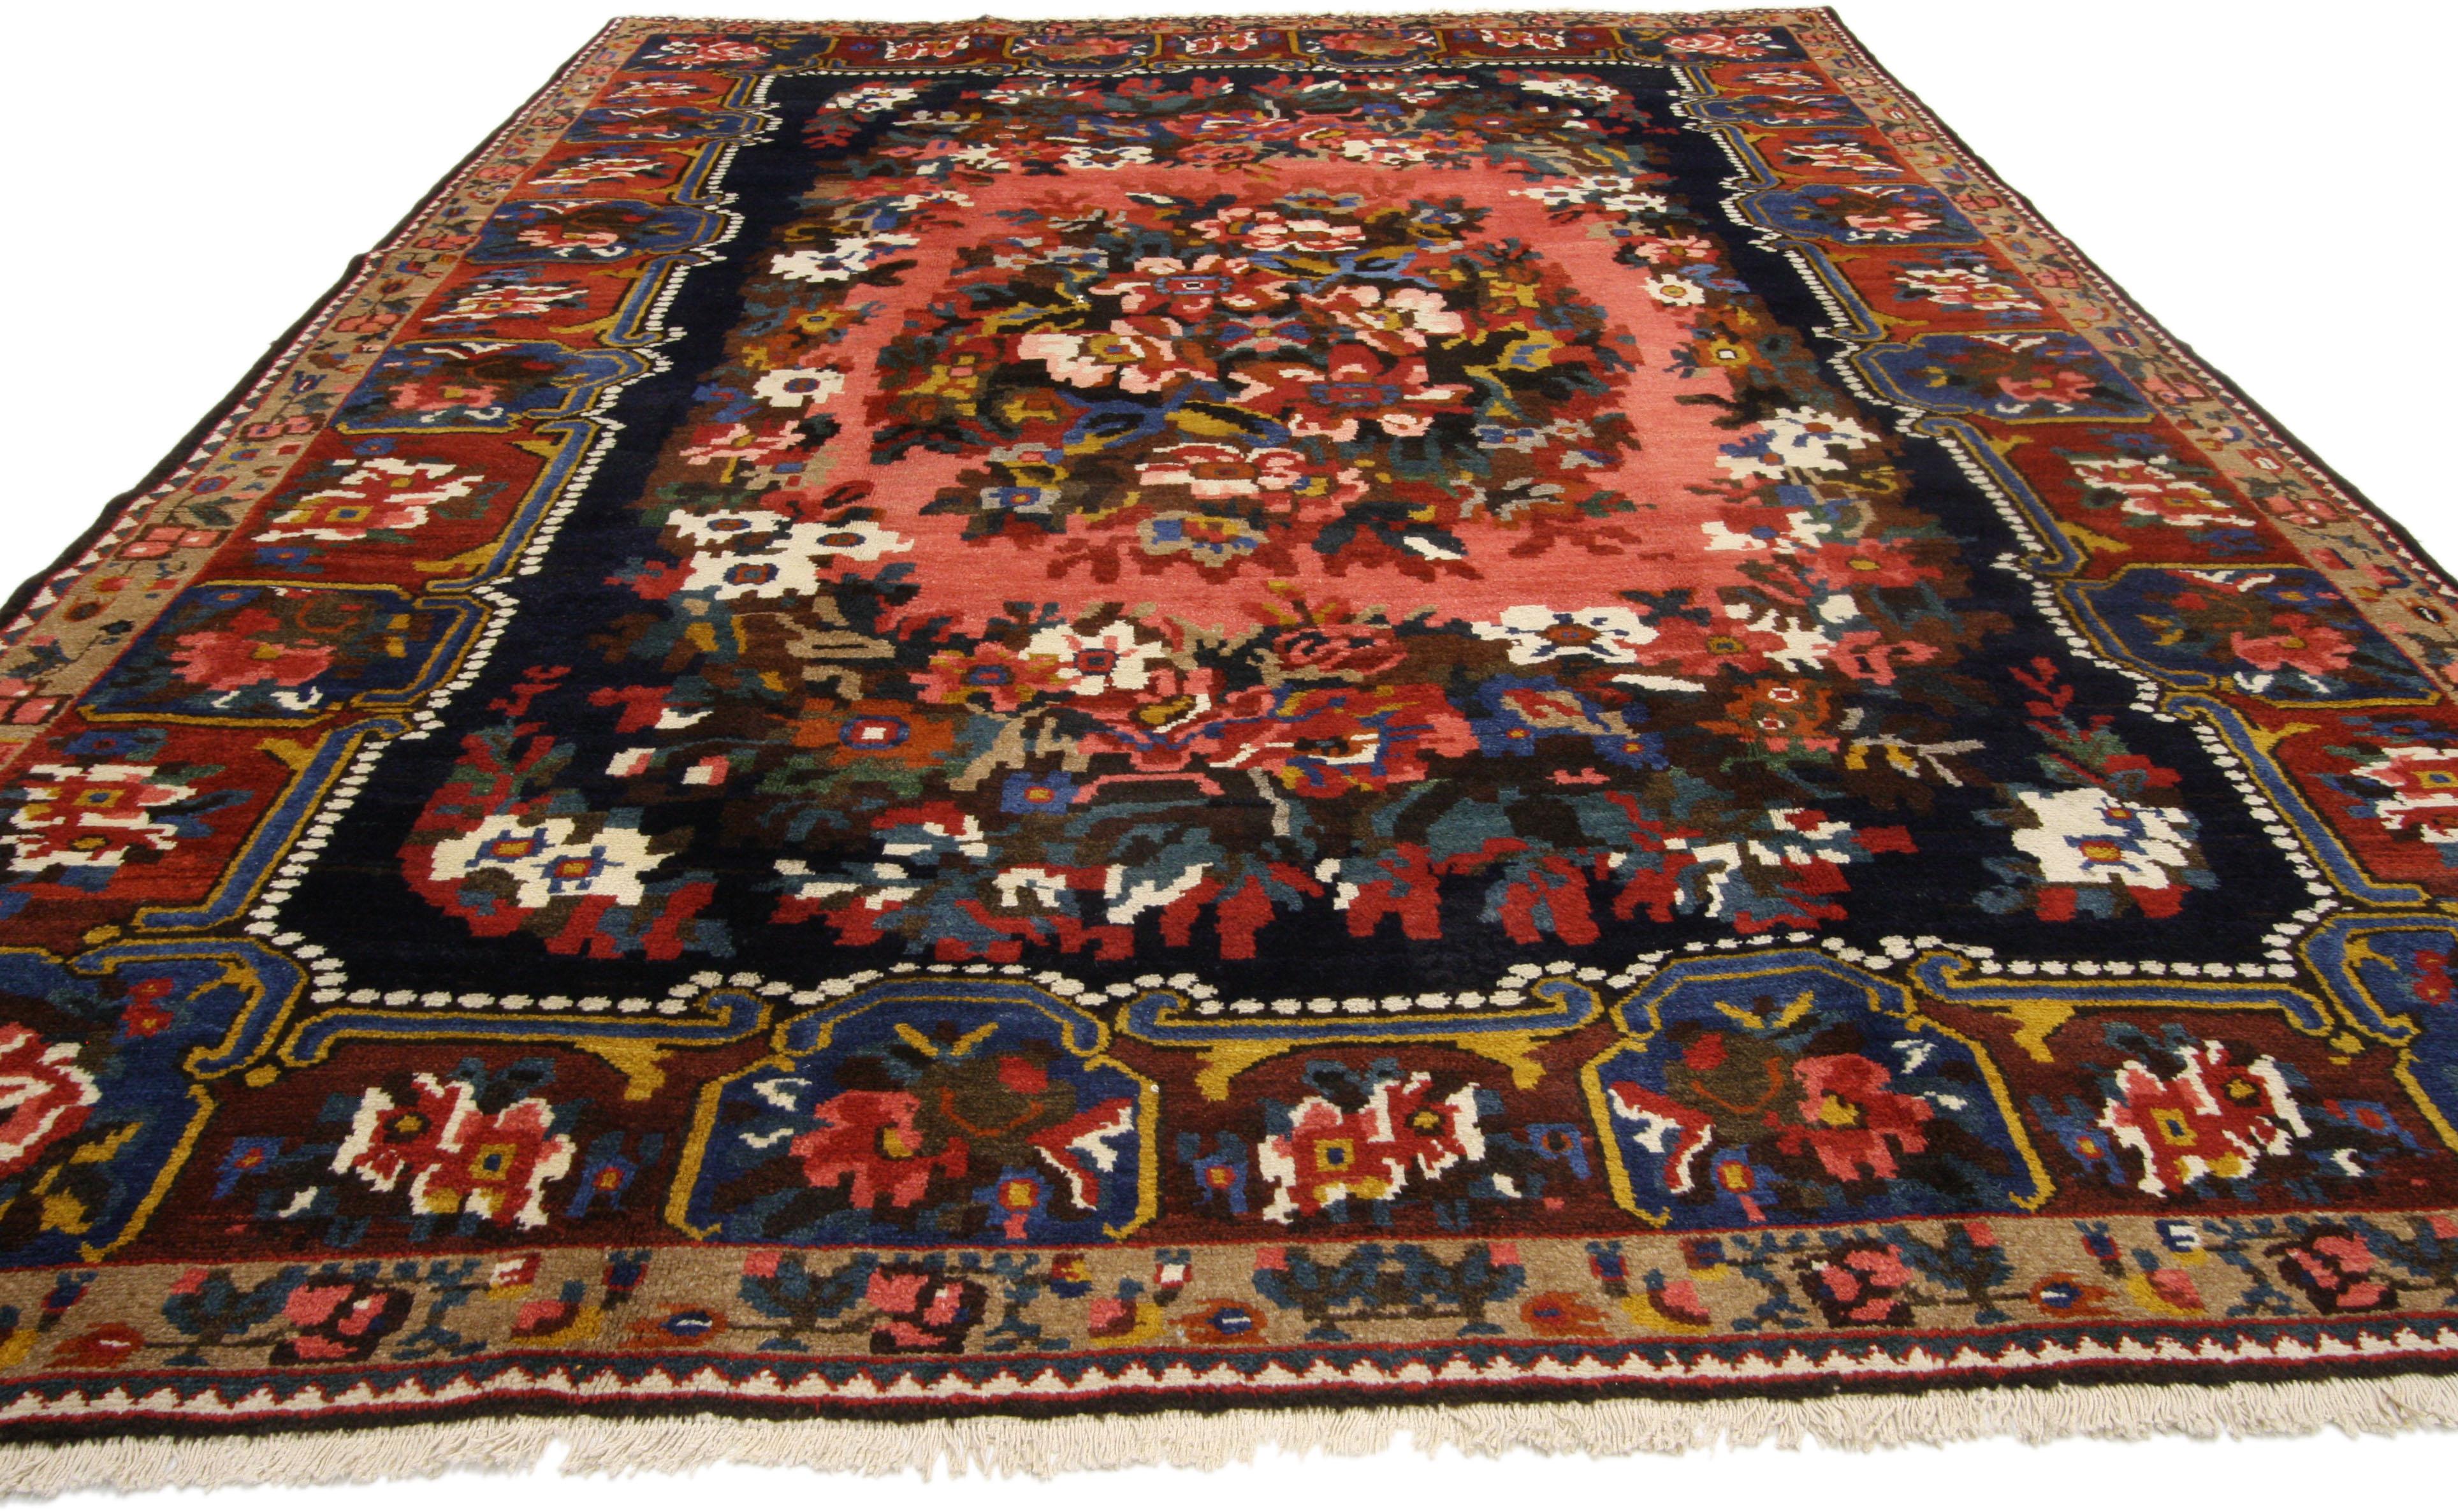 75358 Victorian style Vintage Persian Bakhtiari rug with Floral Design Pearl Border 07'03 x 09'09. This hand knotted wool vintage Persian  Bibibaff Bakhtiari rug with Victorian style features a joyful burst of color in an abundance of blossoming